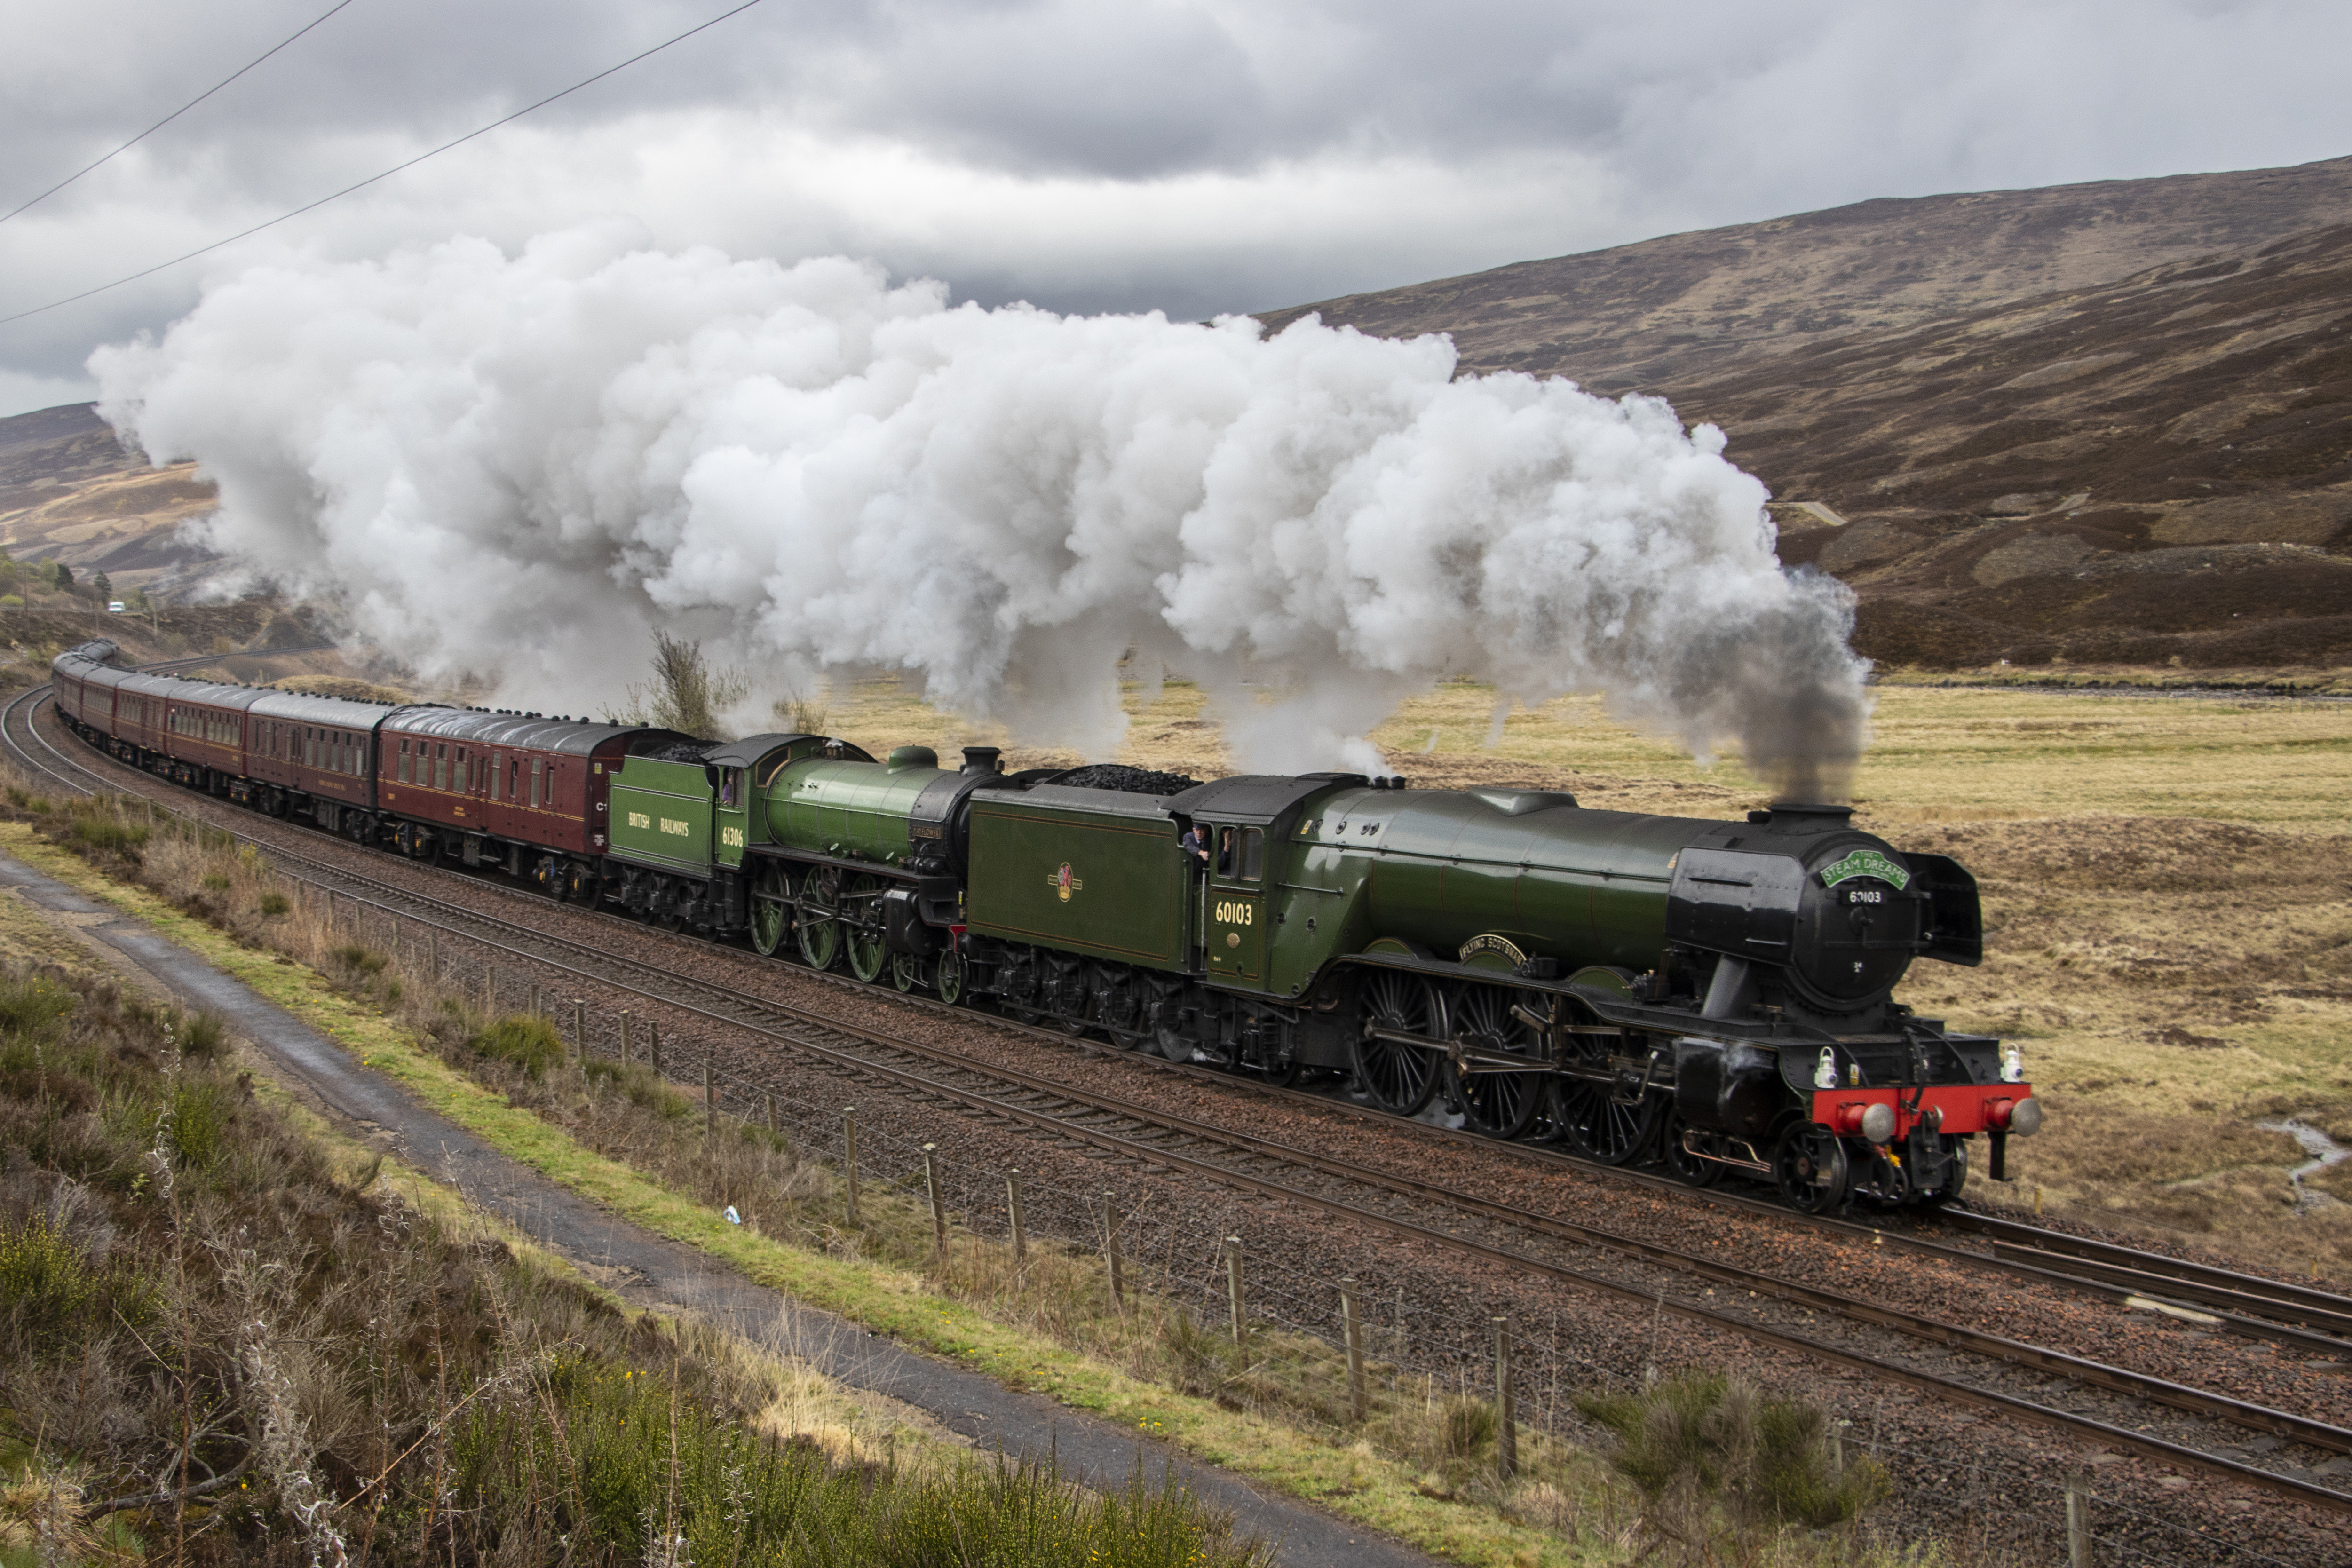 The Flying Scotsman passed by Blair Atholl in 2019.
Picture by Alastair Bellamy